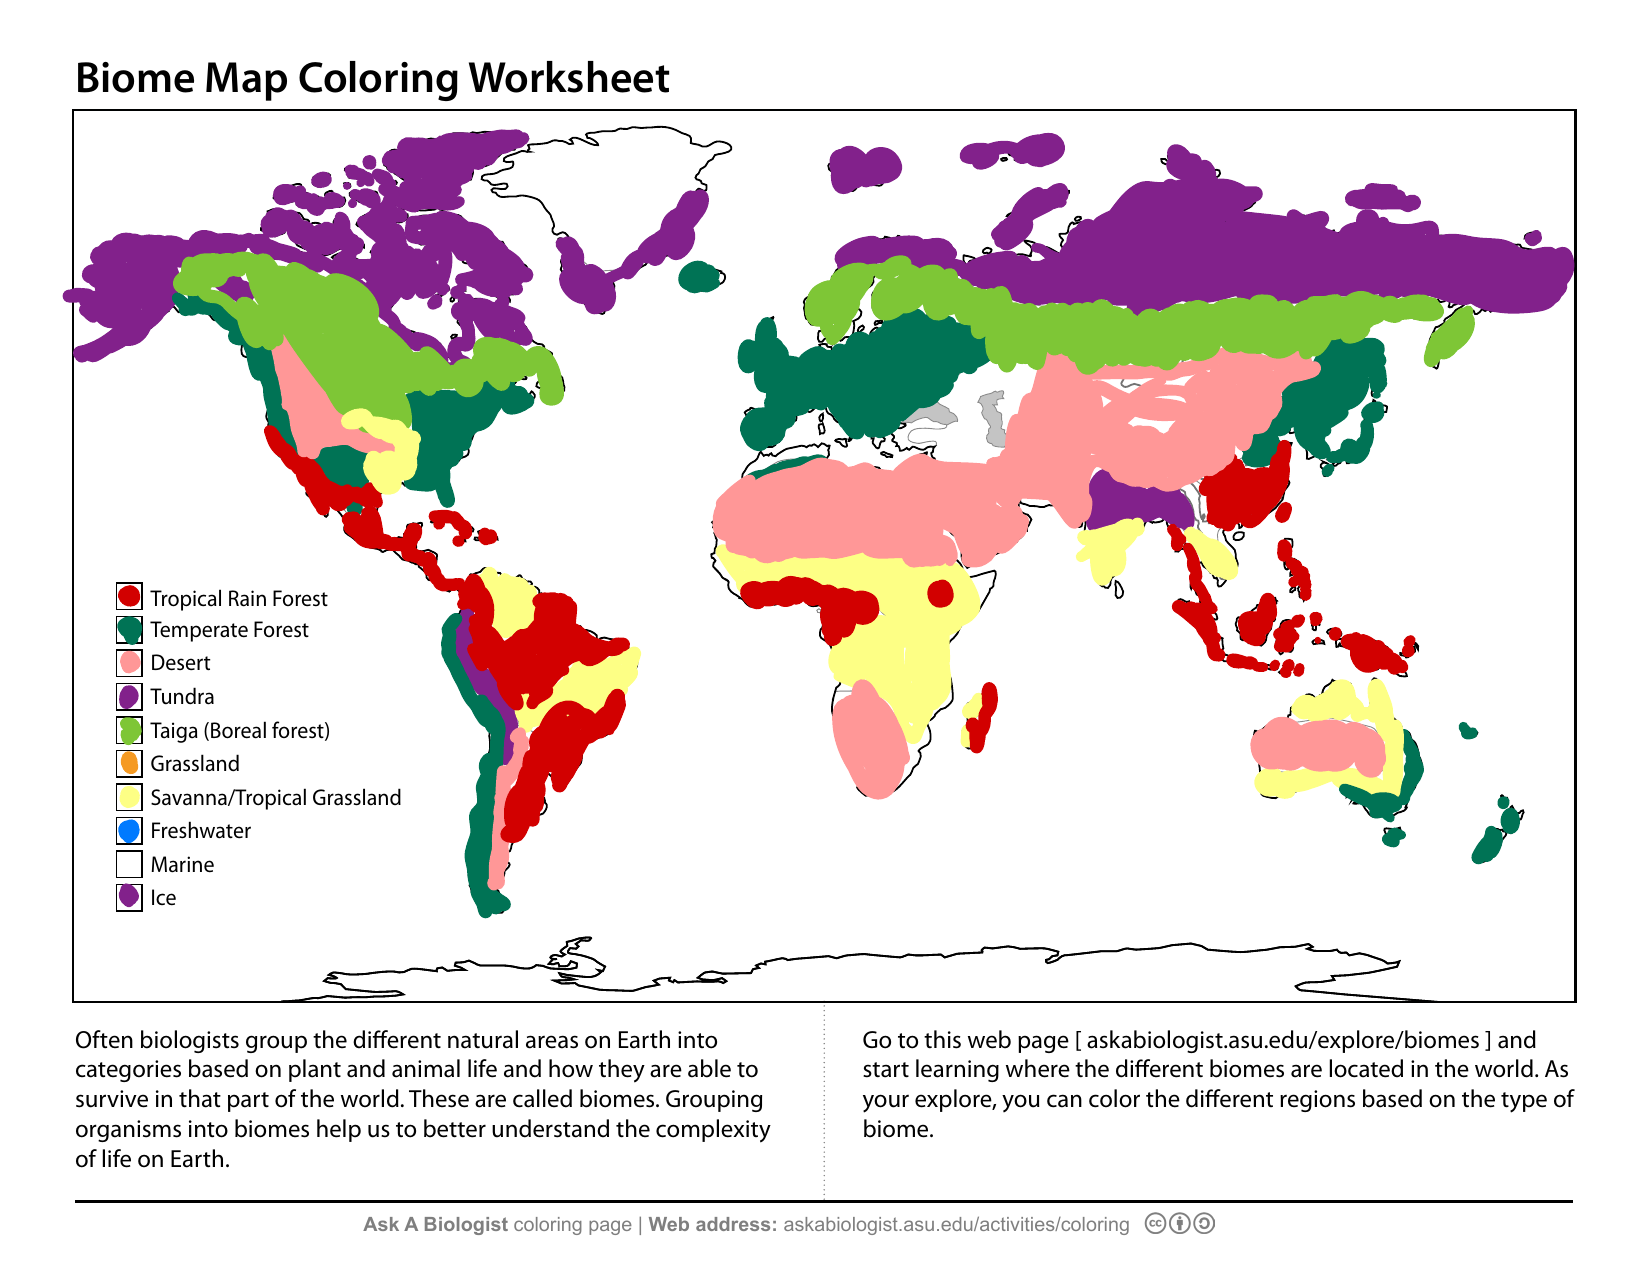 aab-biome-activity%21coloring+sheet For World Biome Map Coloring Worksheet